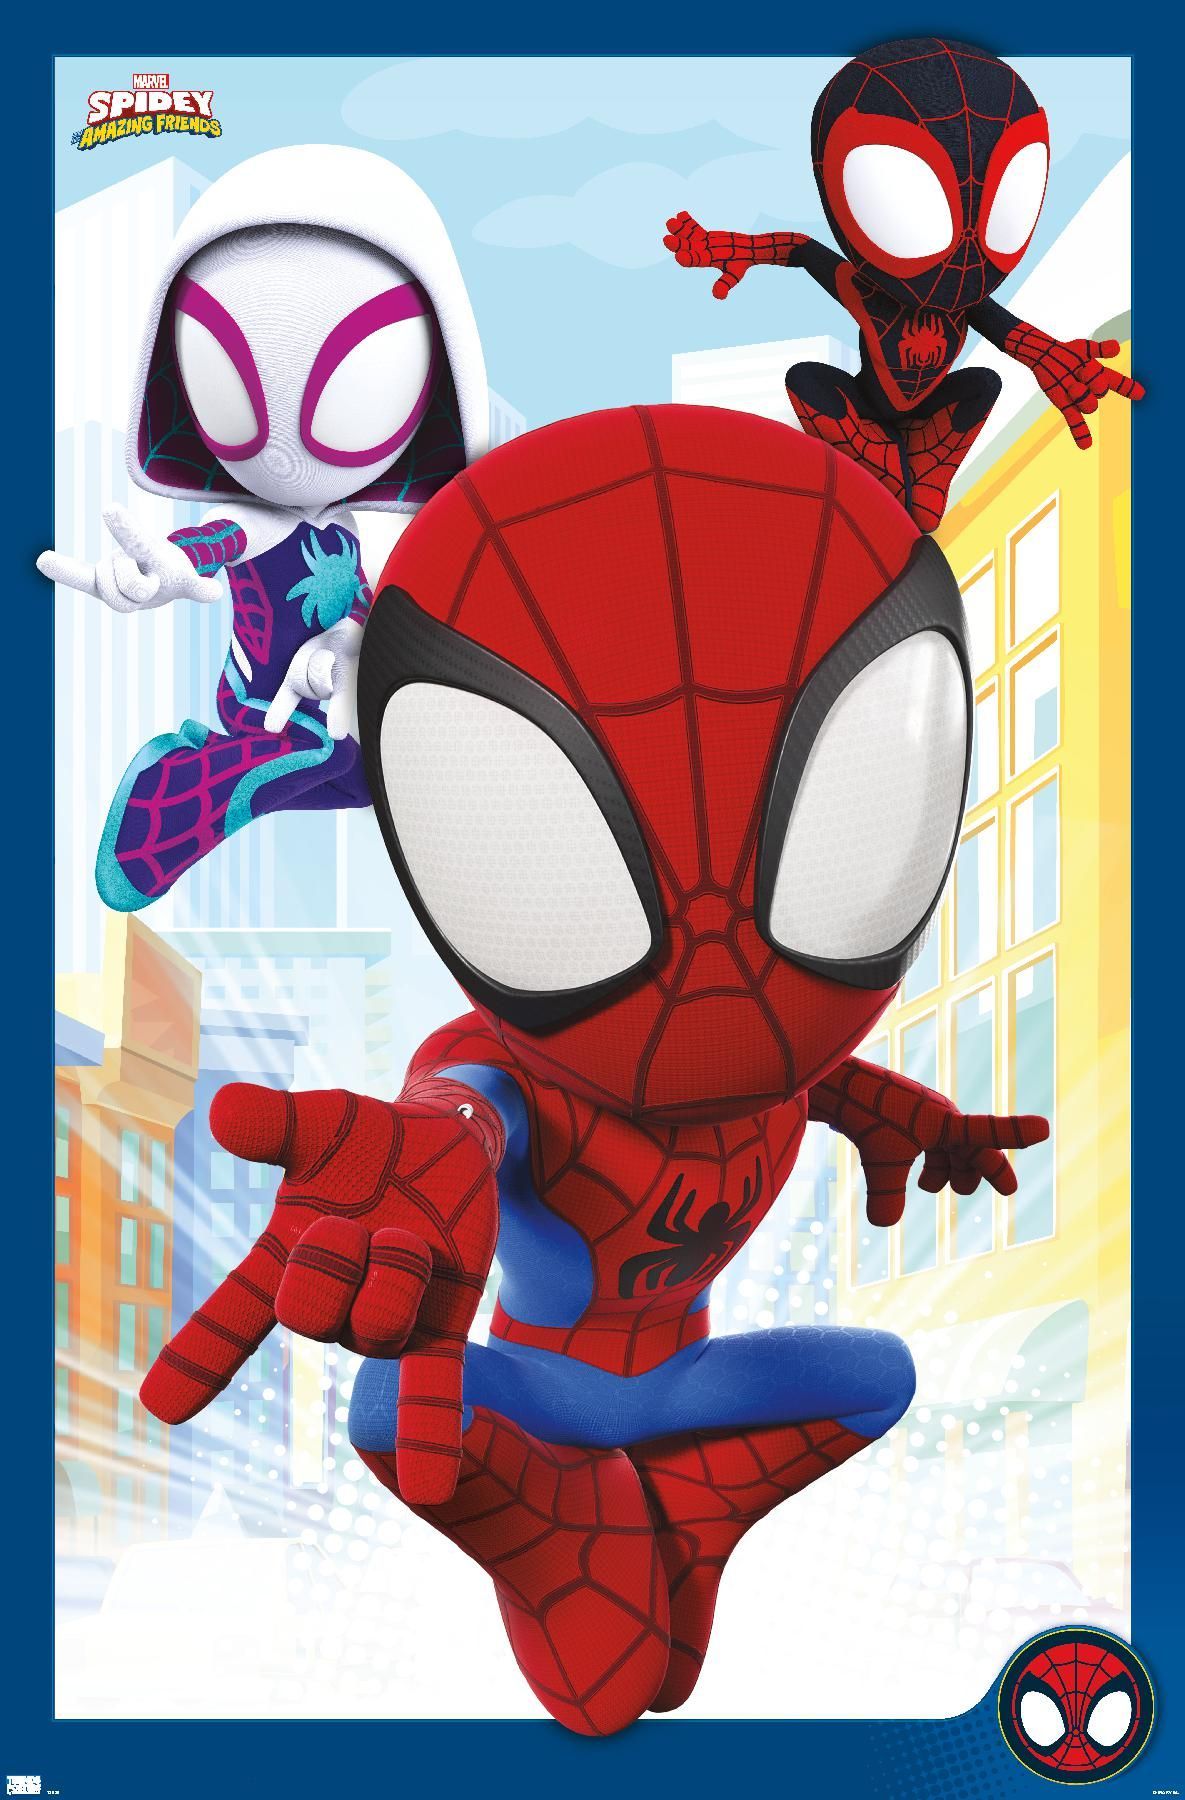 download spidey and his amazing friends 1981